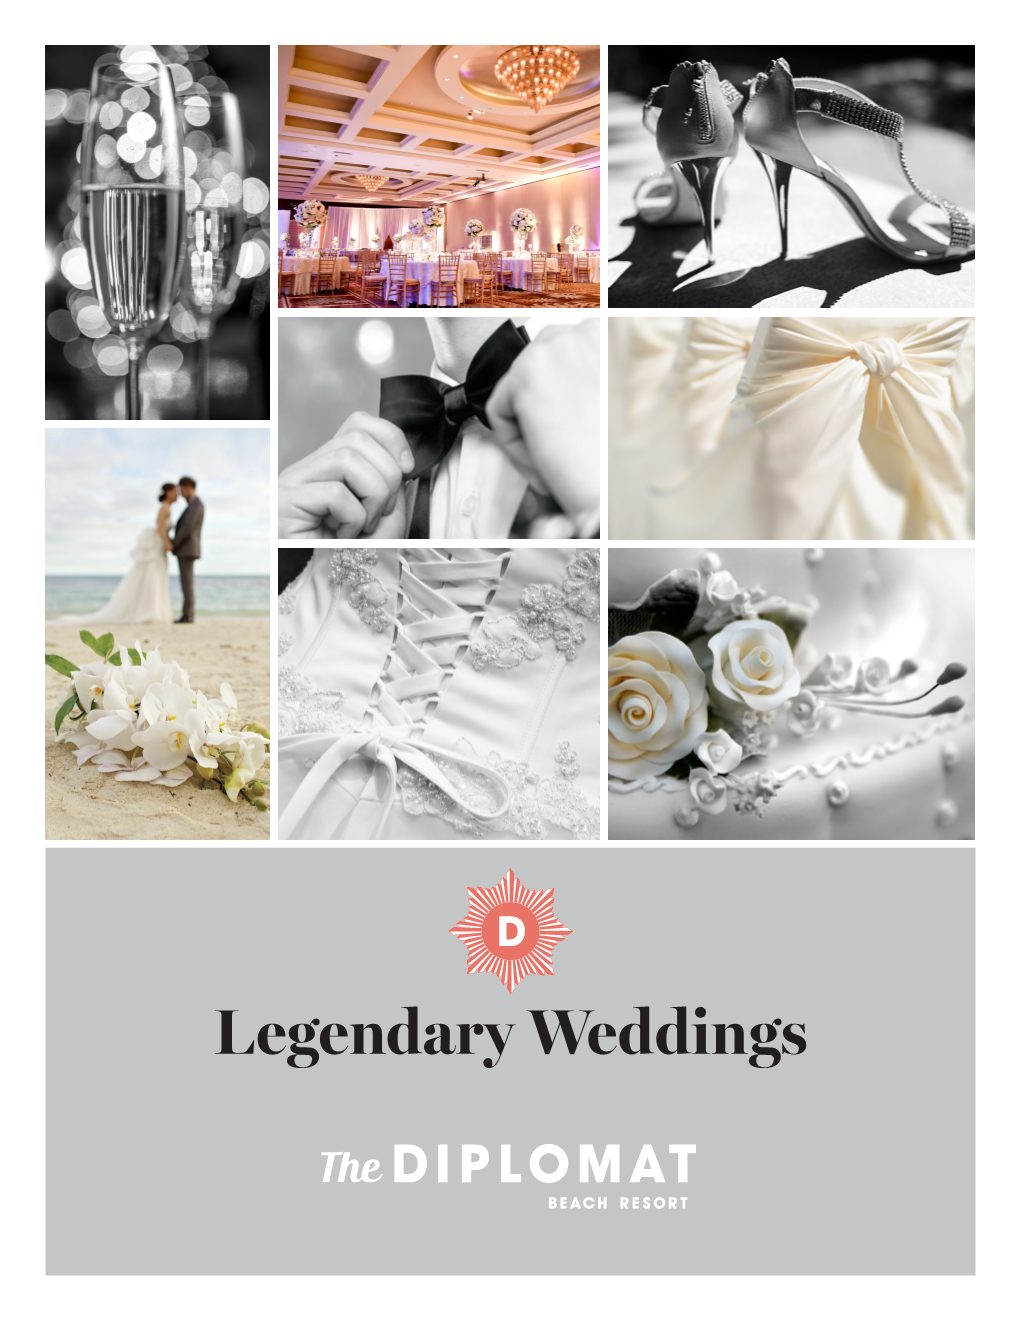 Legendary Weddings the Only Place to Say “I Do”